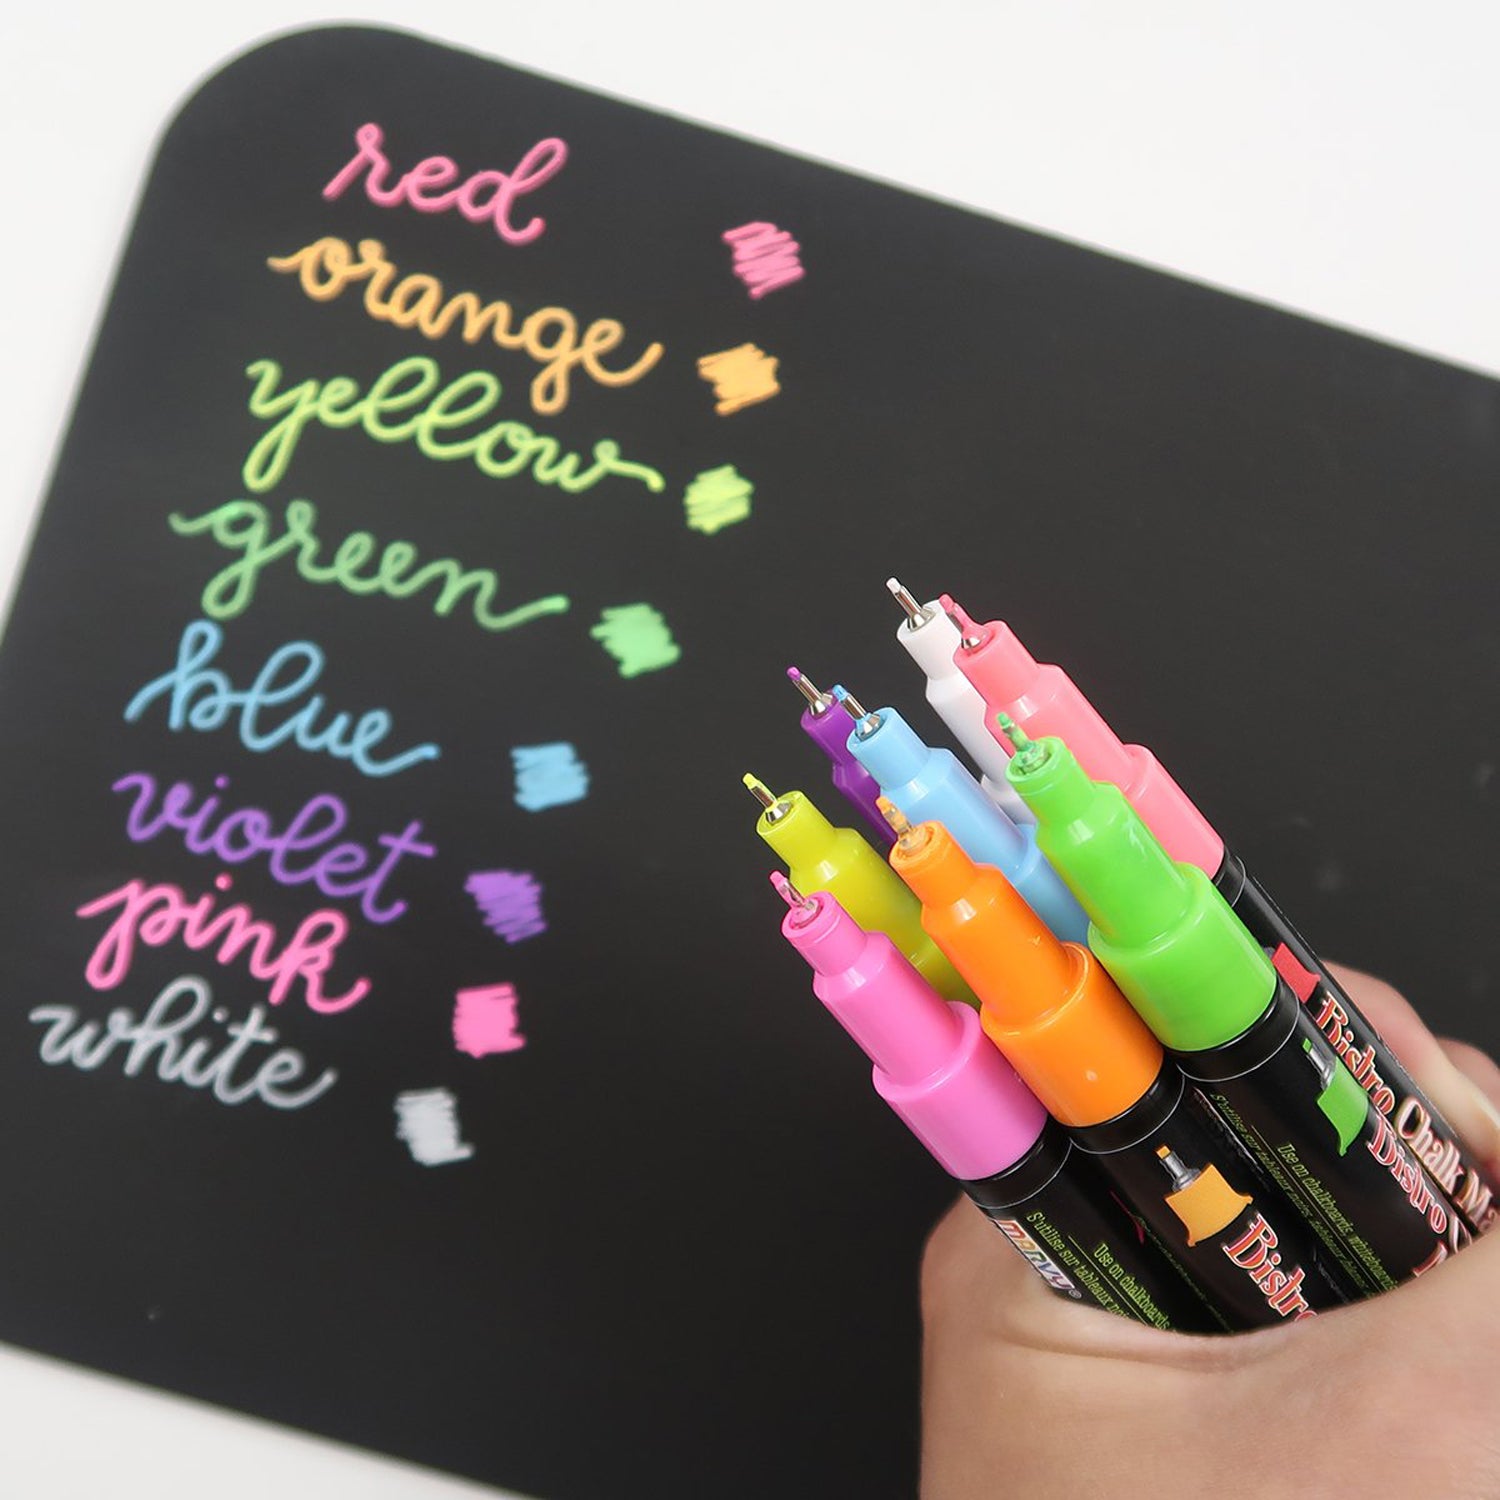 Bistro Chalk Markers, Extra Fine Tip 4-Color Set, Fluorescent Pink, Blue, Green, Yellow, 2 Sets